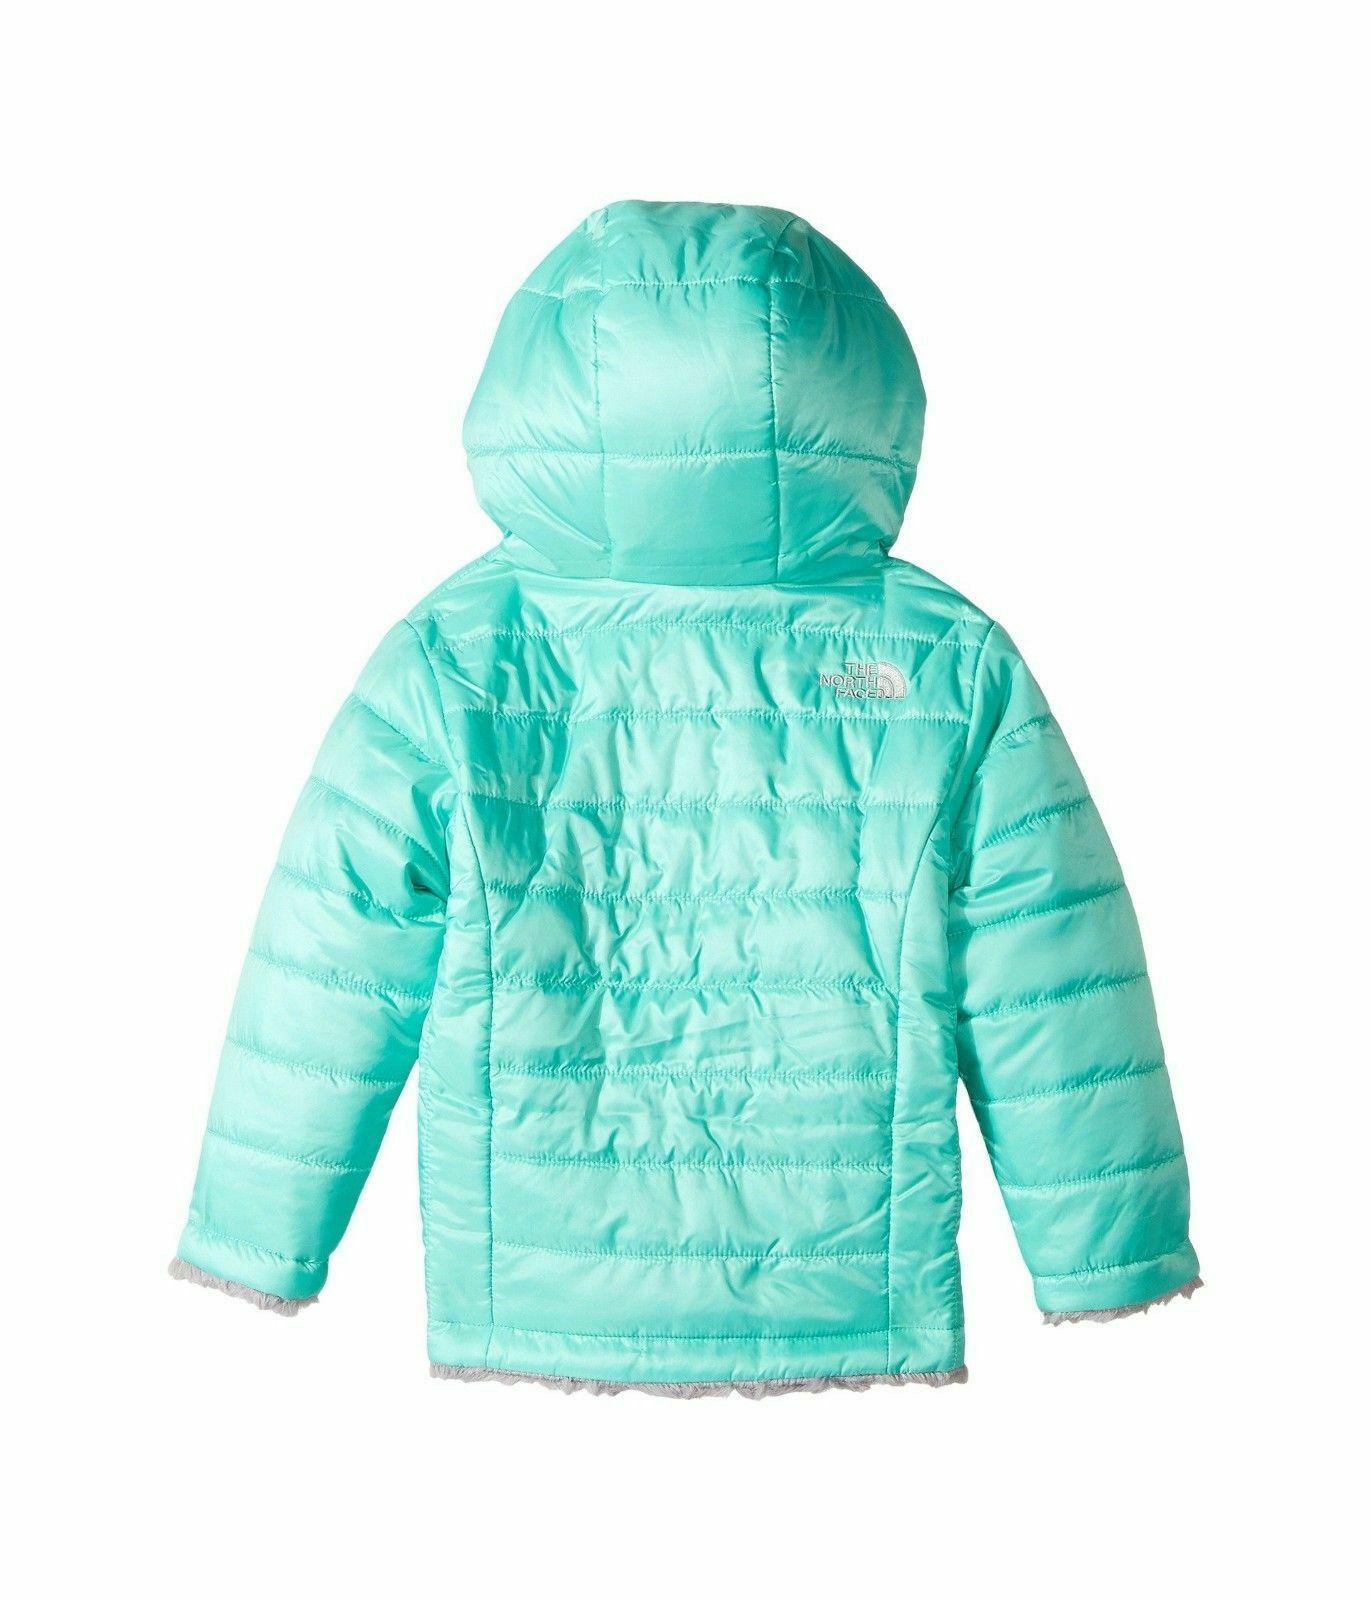 The North Face Baby Girls' Reversible Mossbud Swirl Hoodie 18 months